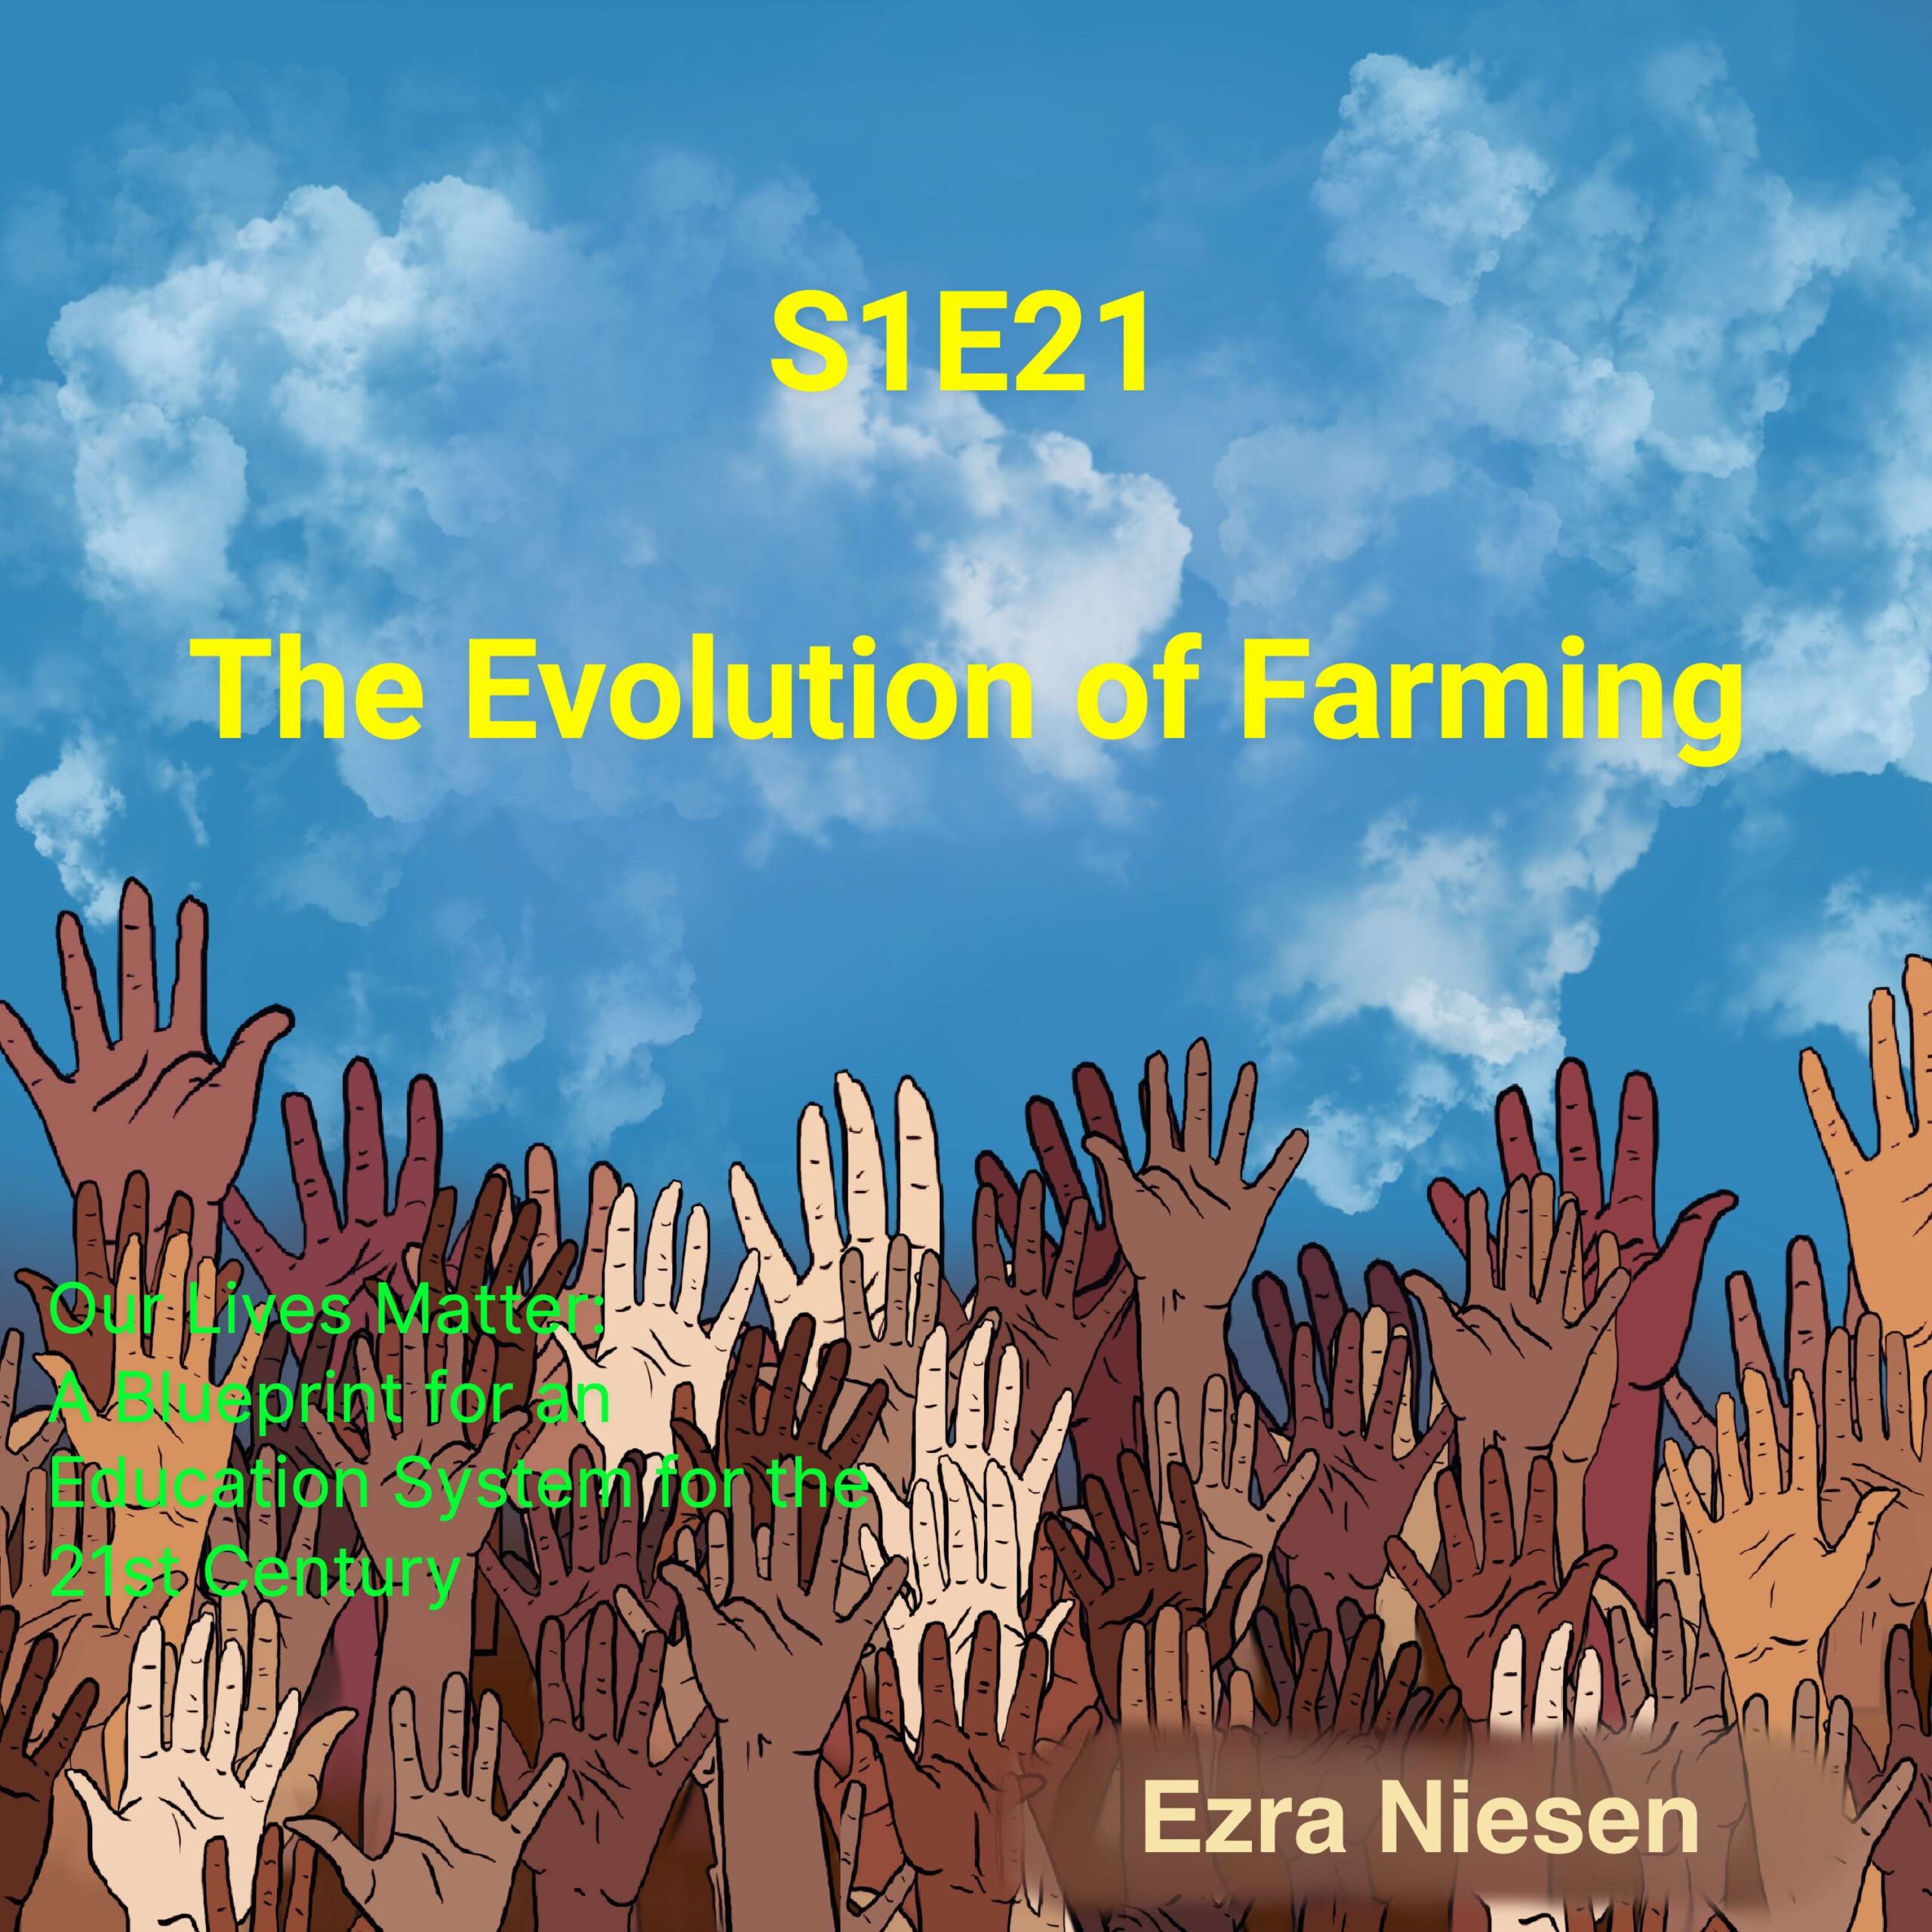 Our Lives Matter S1E21:  The Evolution of Farming